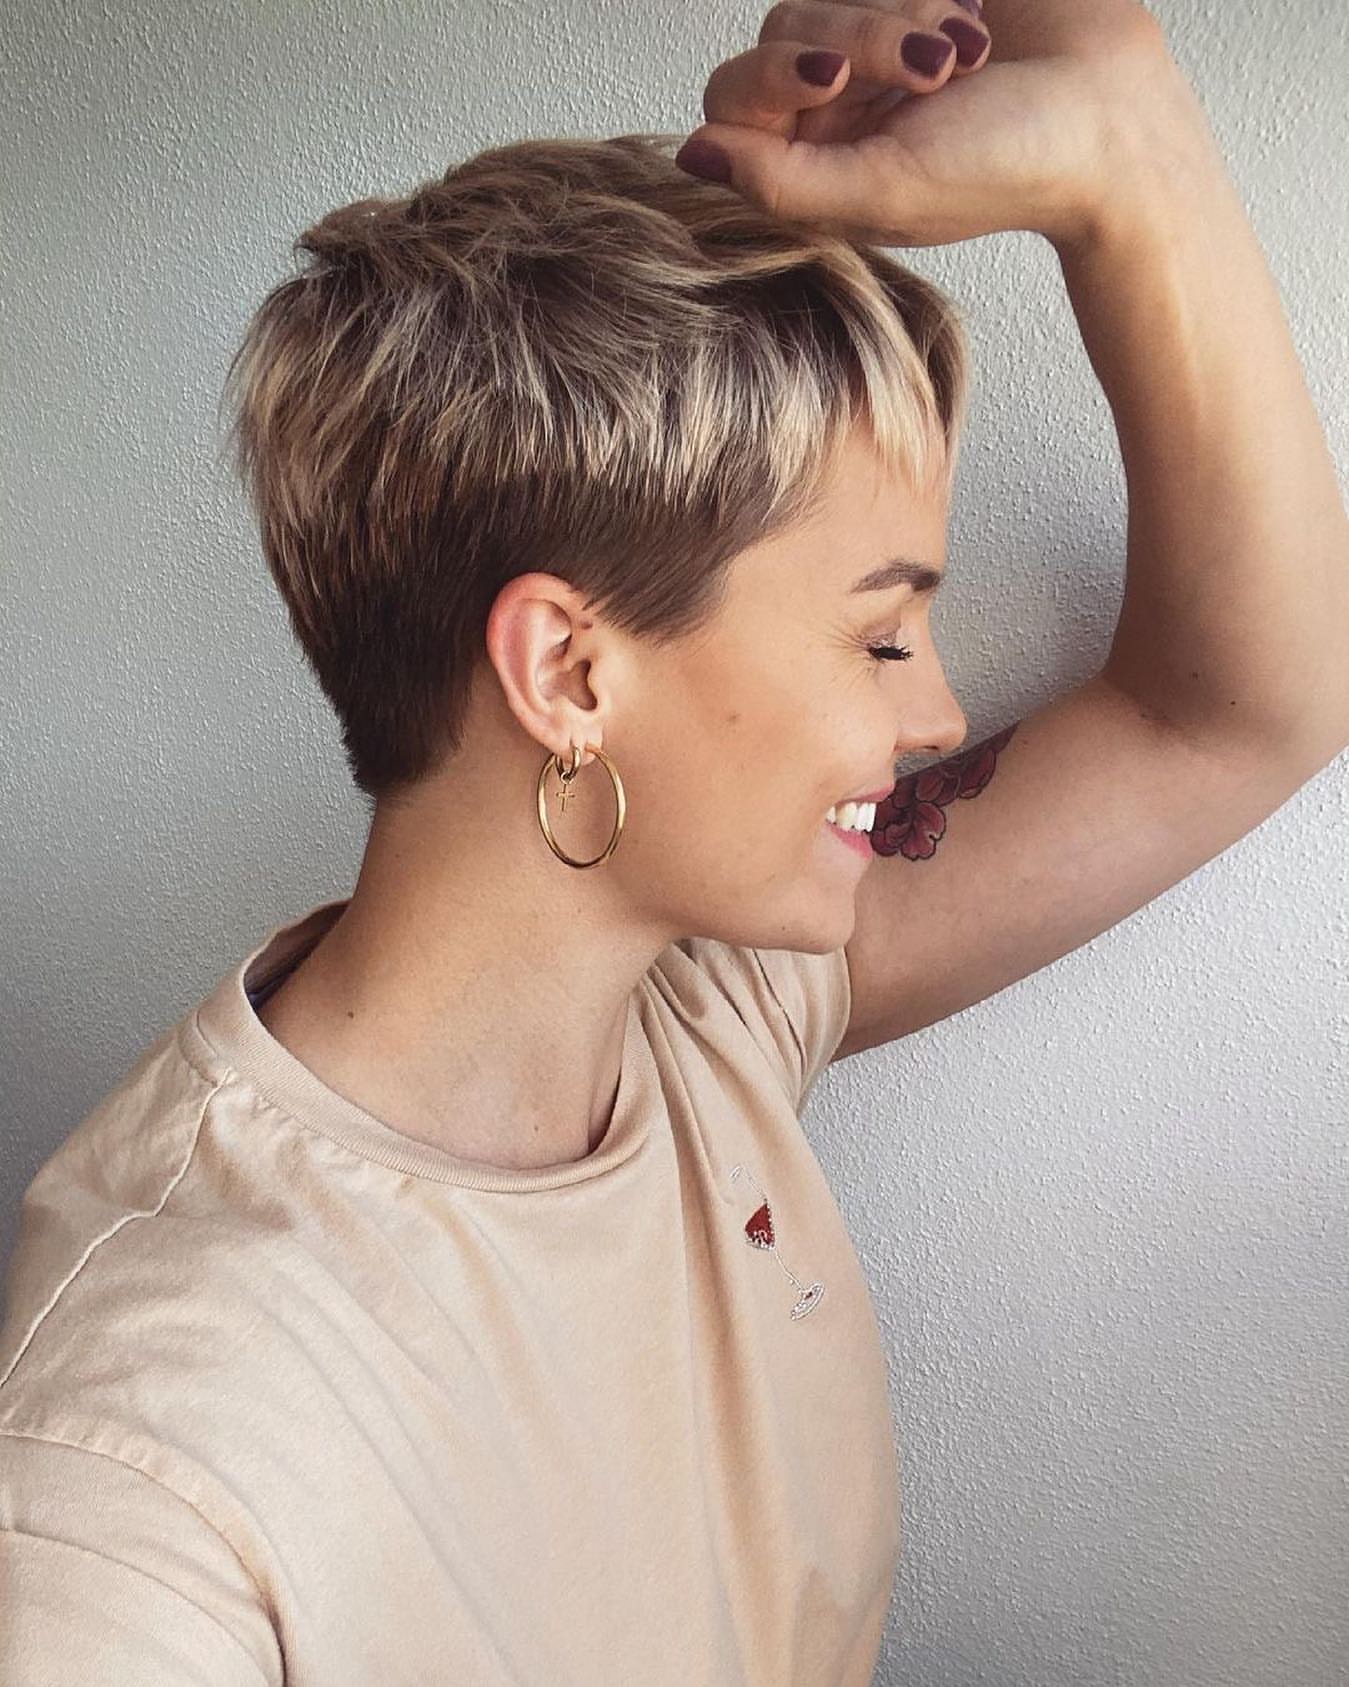 Short Pixie Hairstyles & Ideas For Your Haircut